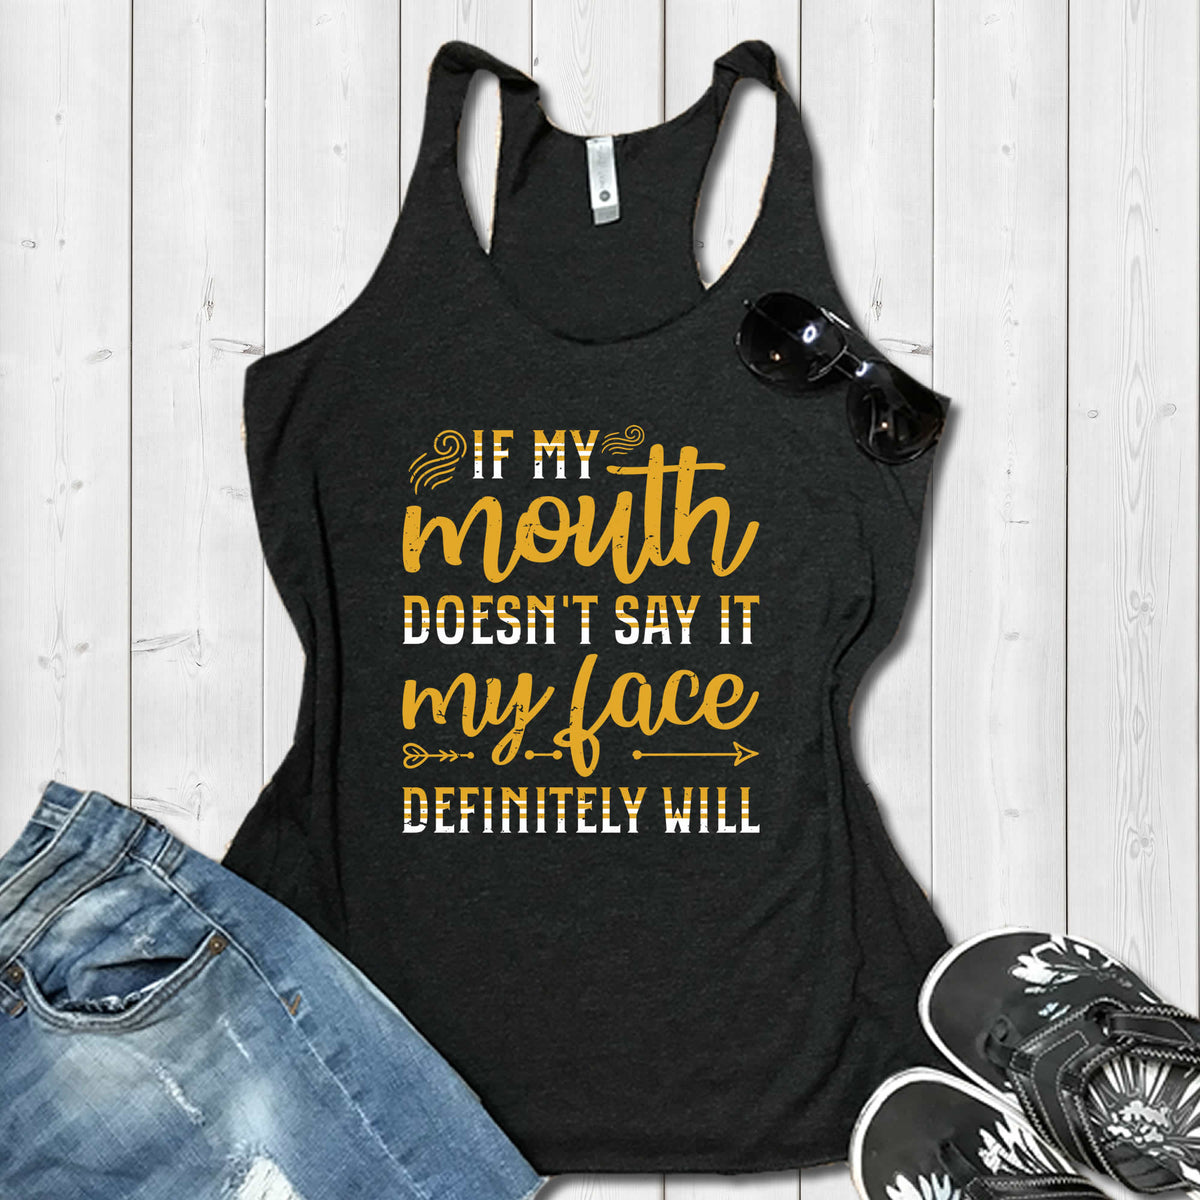 If My Mouth Doesn't Say It Funny Sarcastic Shirt | Women's Tri-blend Racerback Tank Top